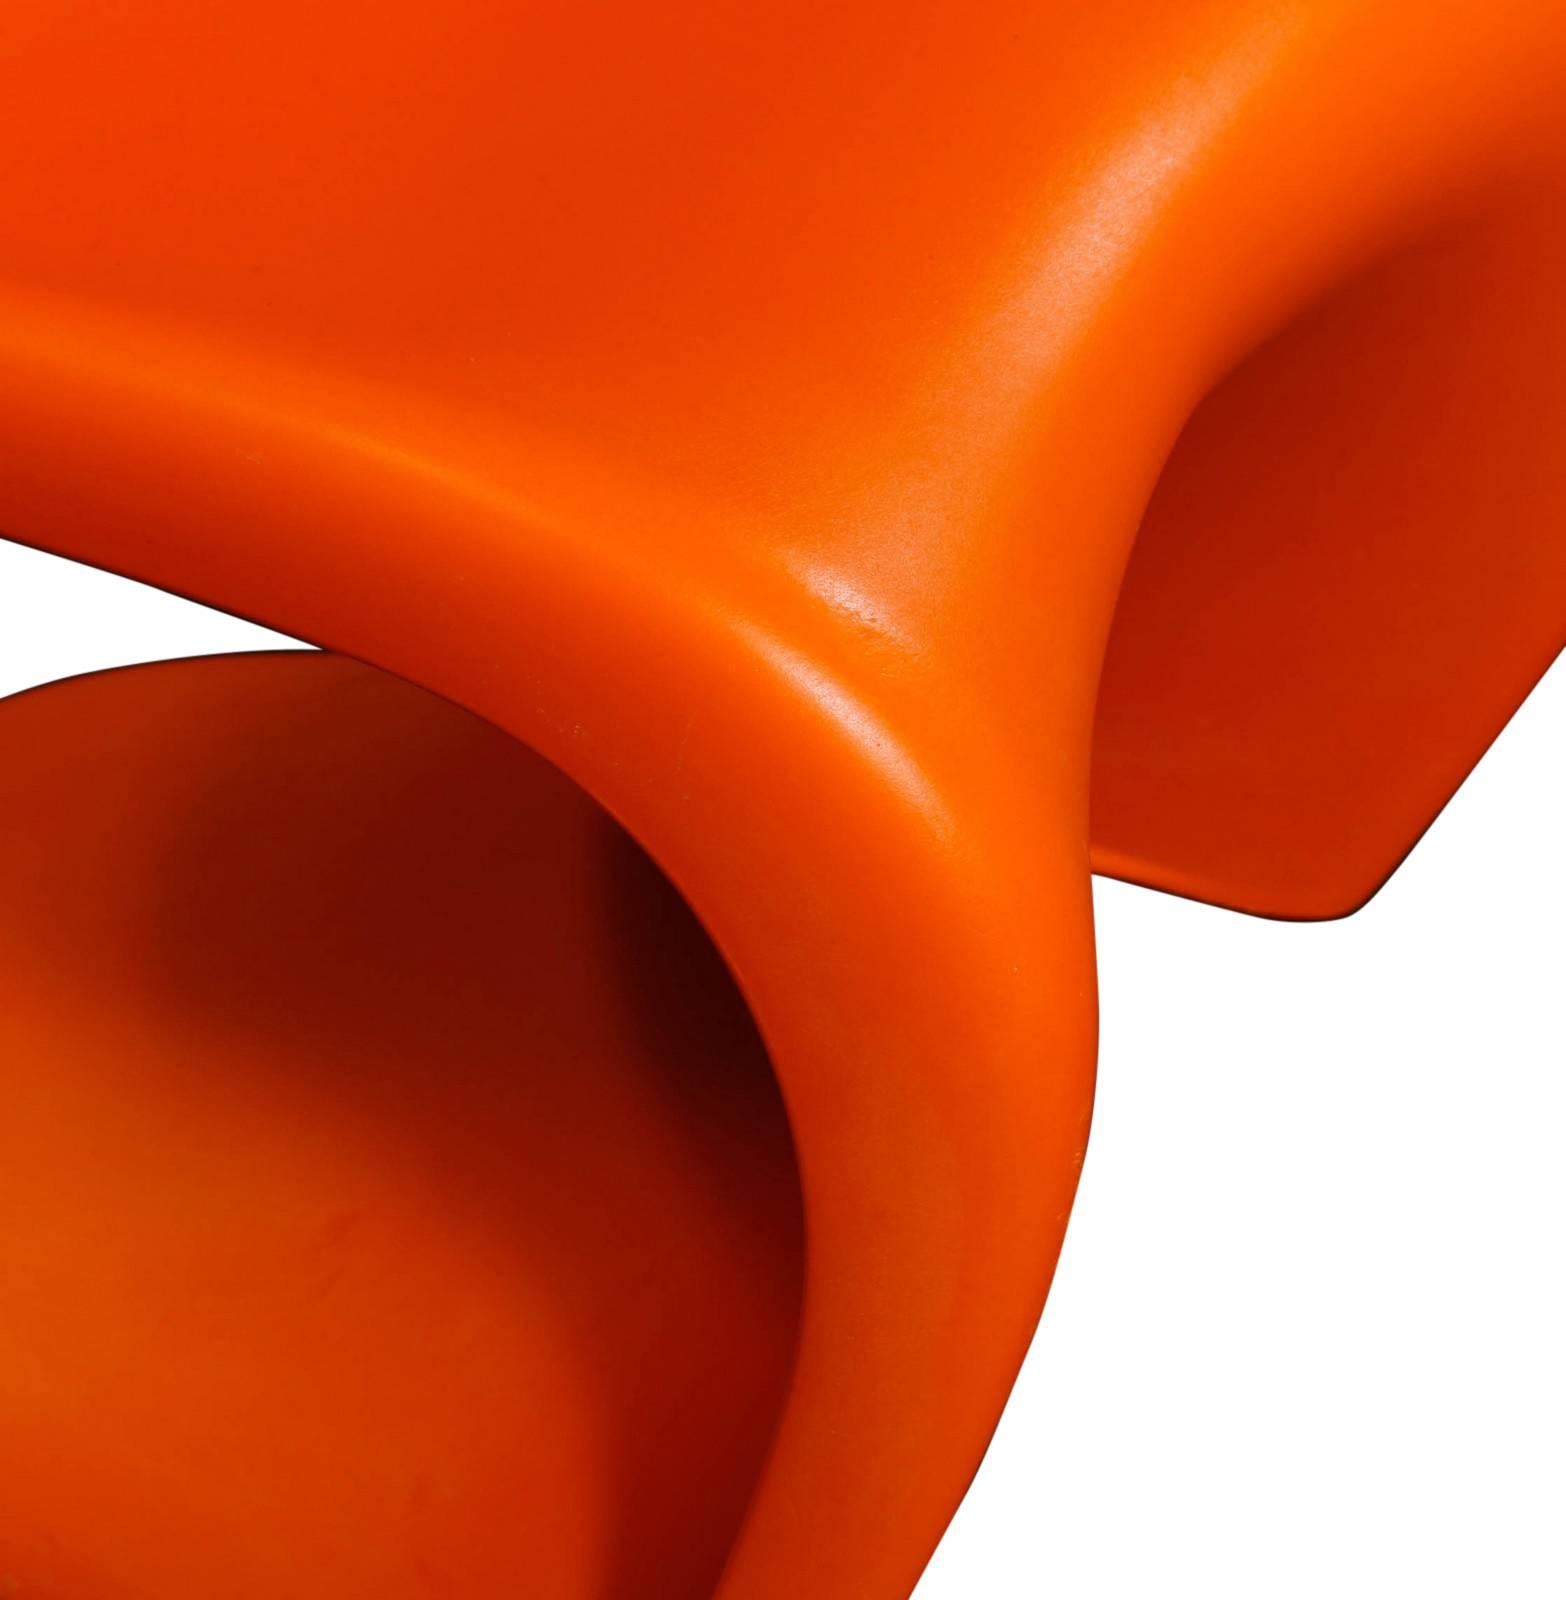 Verner Panton 1926-1998. Four chairs for children ‘Junior Panton Chair’ (two orange and two green), made of anti-slip polypropylene. Designed in 1958. Produced by Vitra. Measures: H 61 cm, W 37, D 40 cm. Traces of wear.